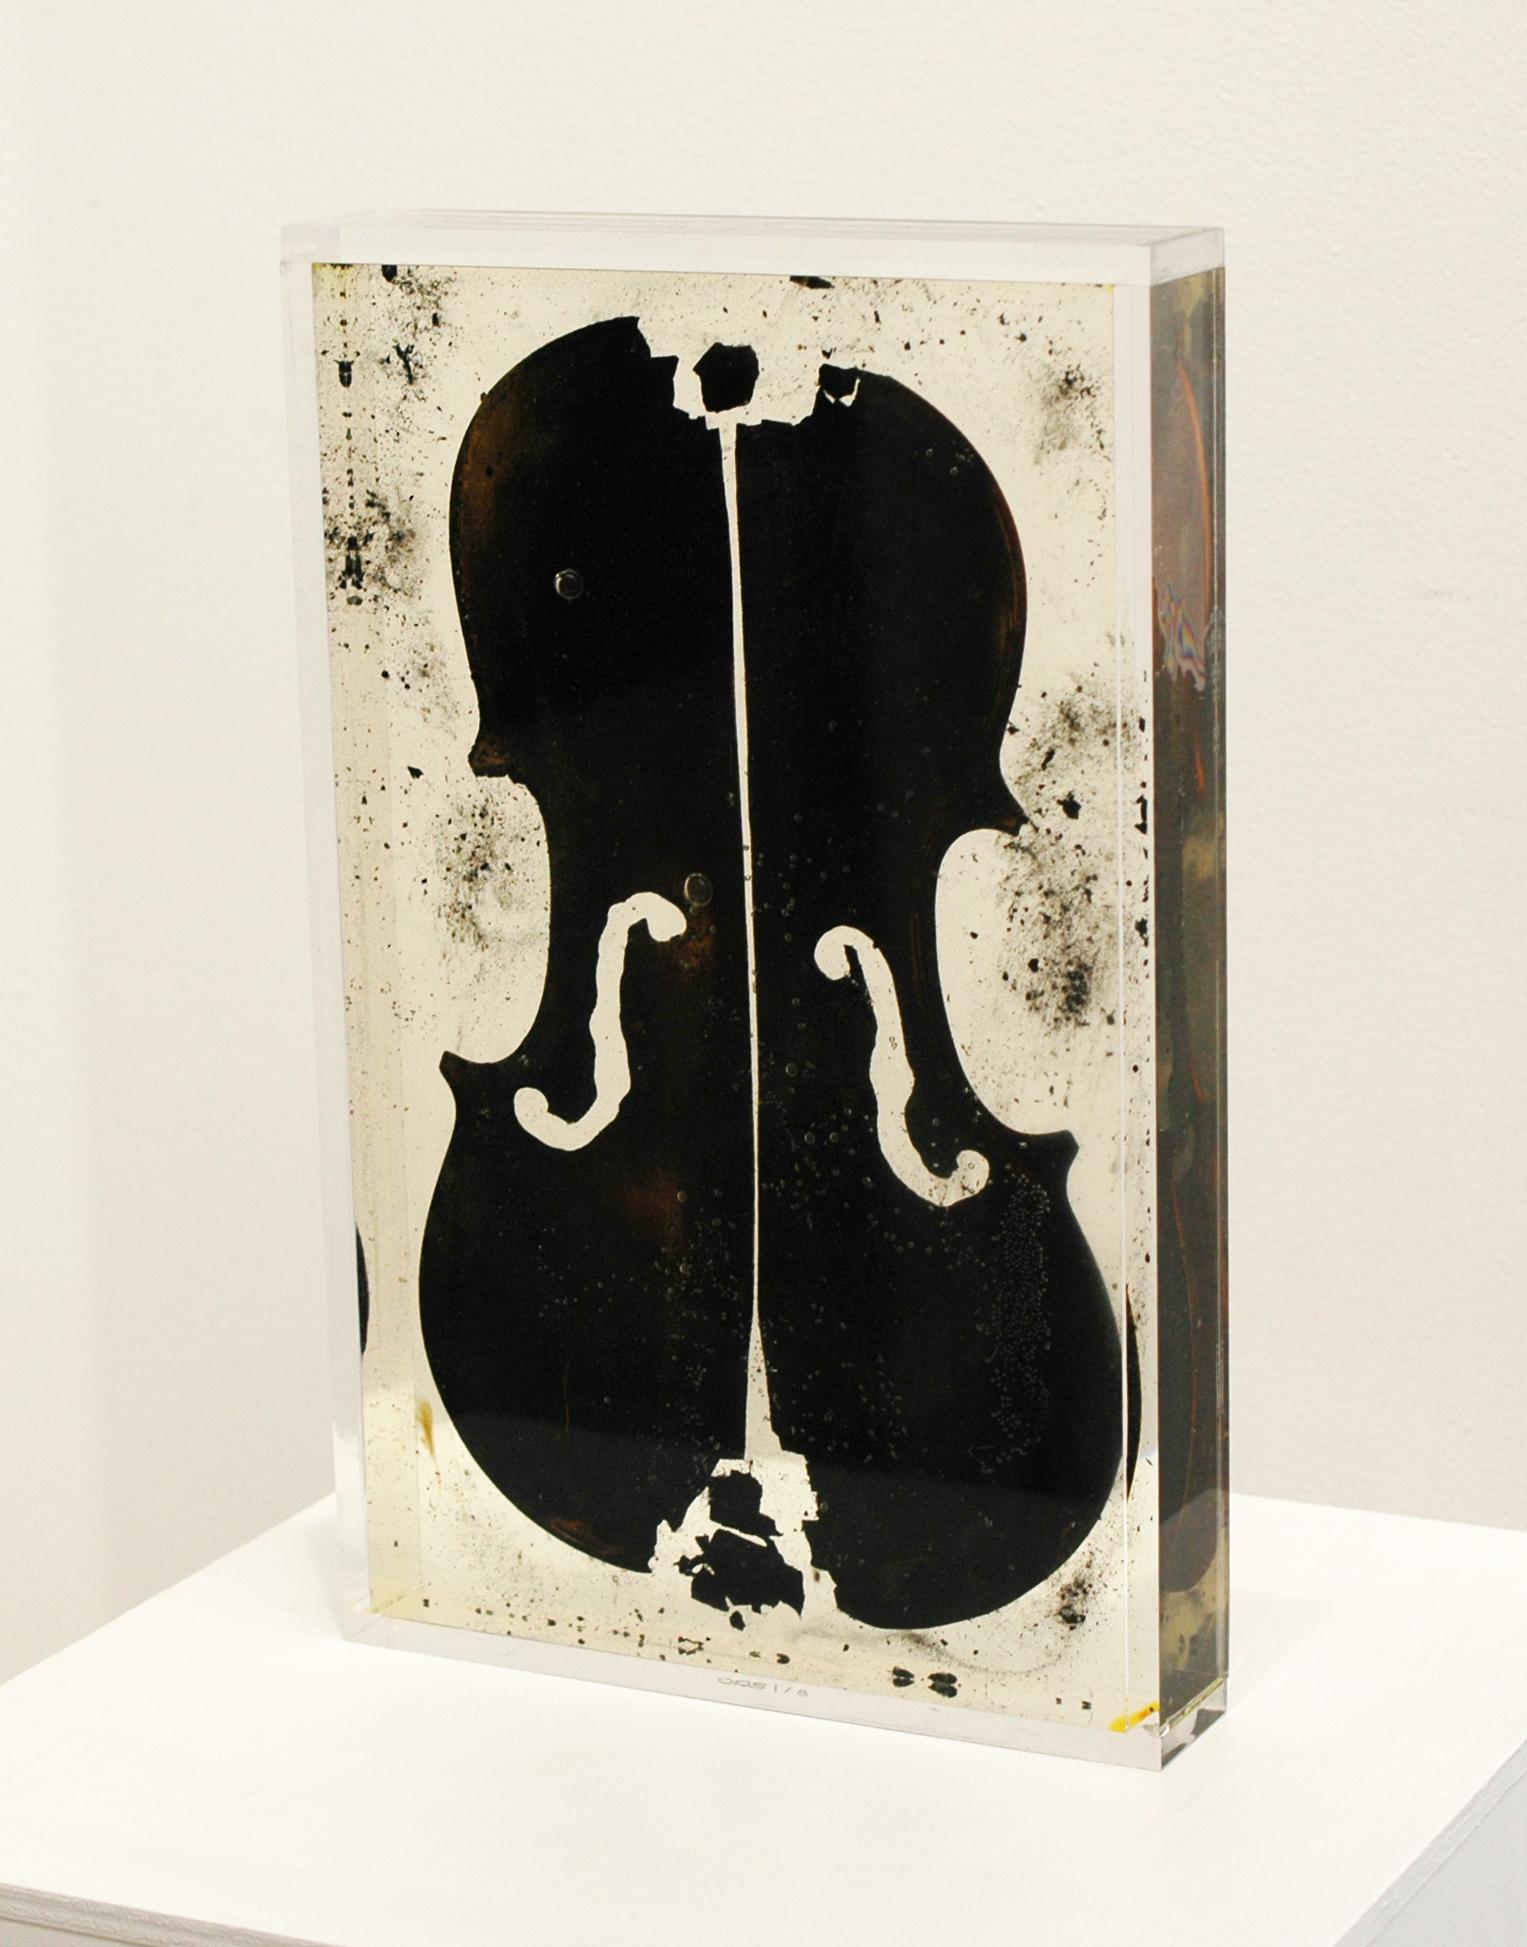 Resin, plexiglass and burnt violin
40 x 25 x 1 cm (15.7 x 9.8 x 0.4 in)


Signed by the artist
Certificate of authenticity

The Last Violin

Sliced burnt violin in resin and plexiglas. Signed and numbered 81/200.

N° 2498 of the Denyse Durand-ruel